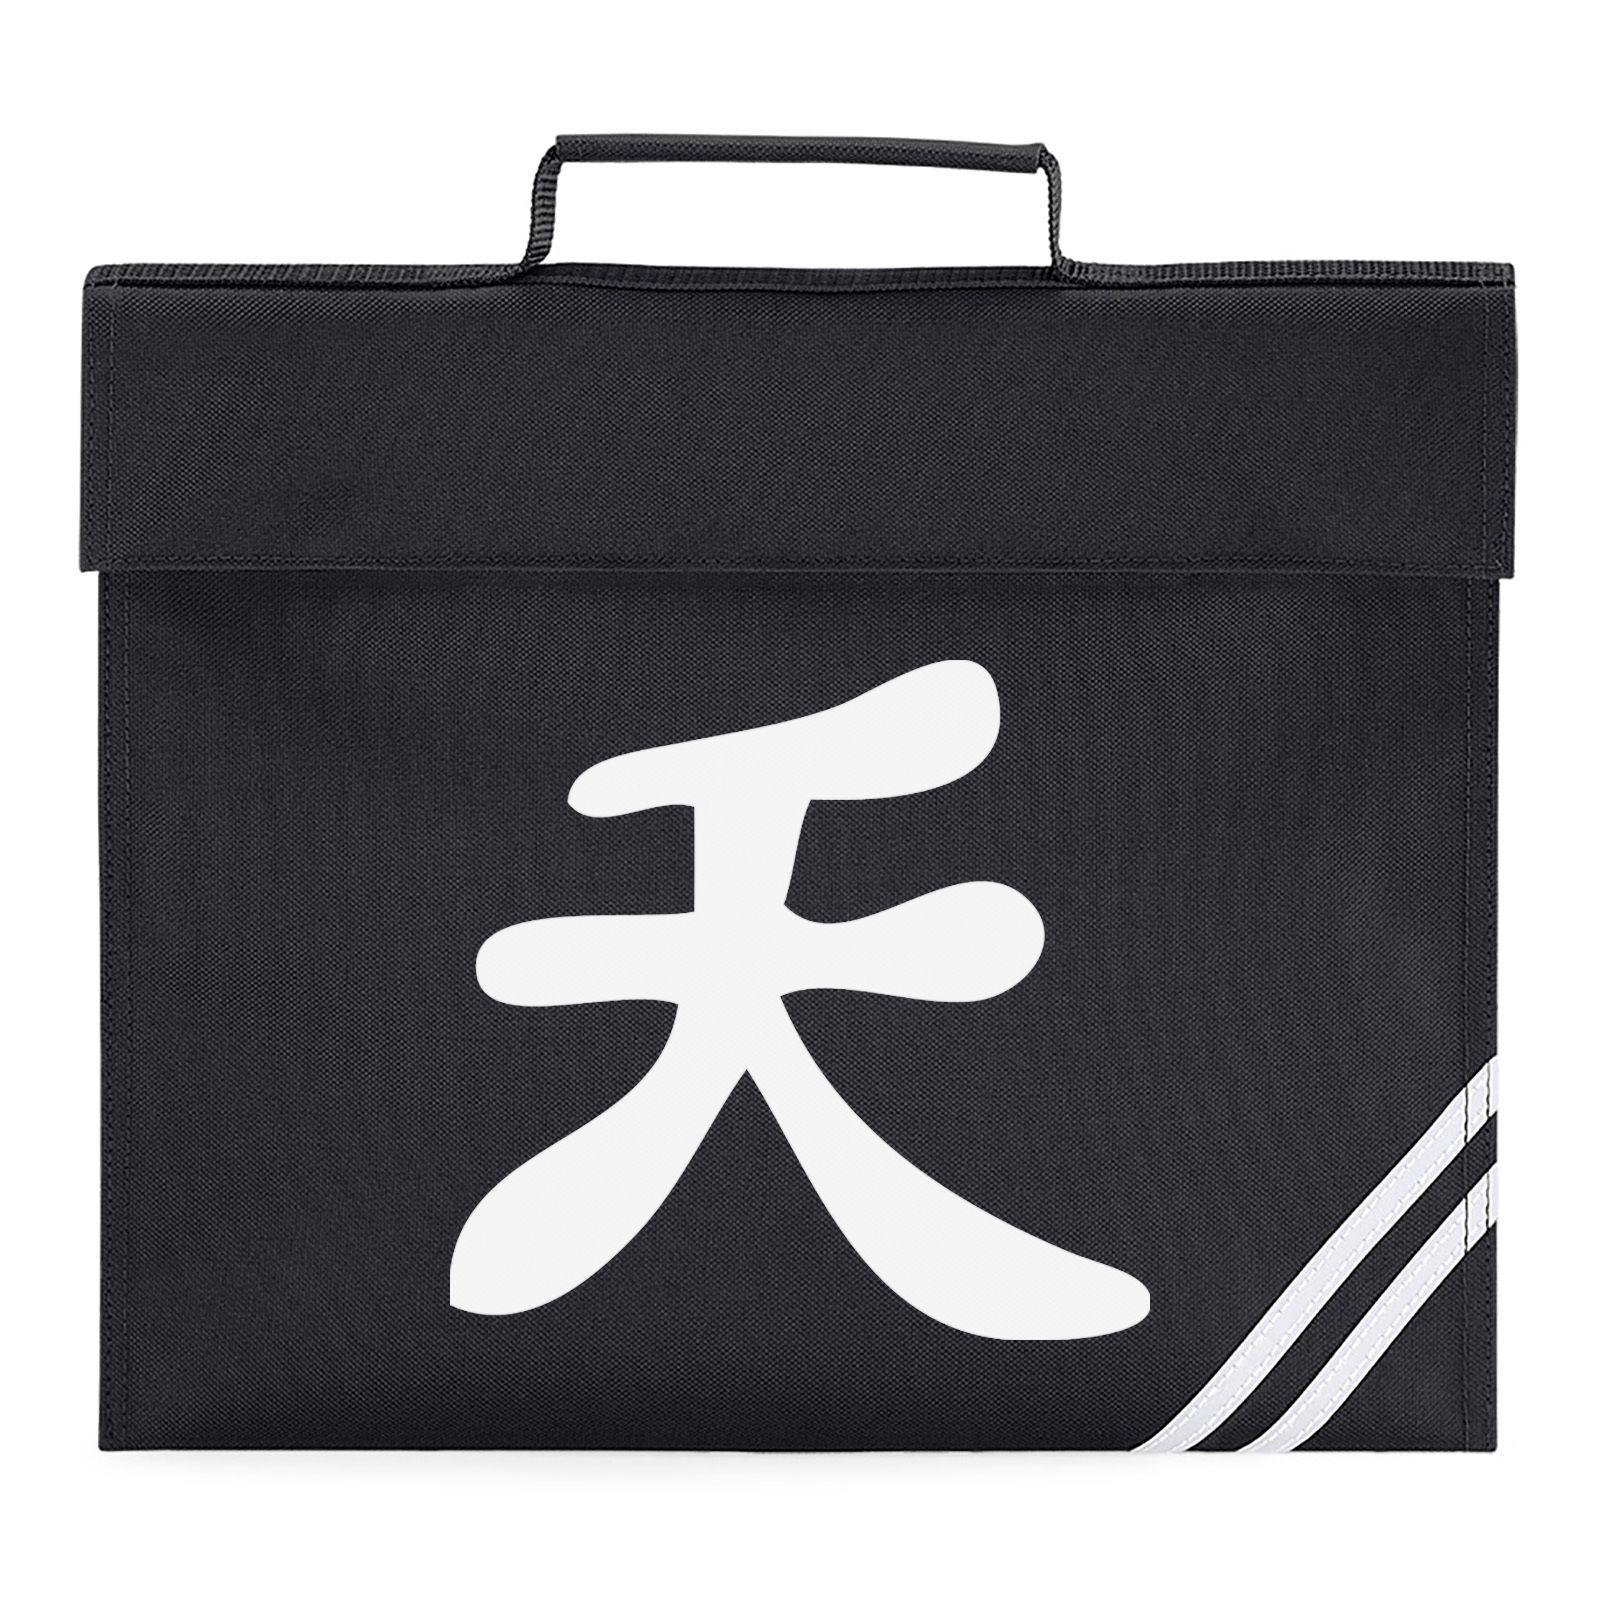 To Die for Logo - To Die Young Kanji Logo Anime Manga Book Bag. Available in many